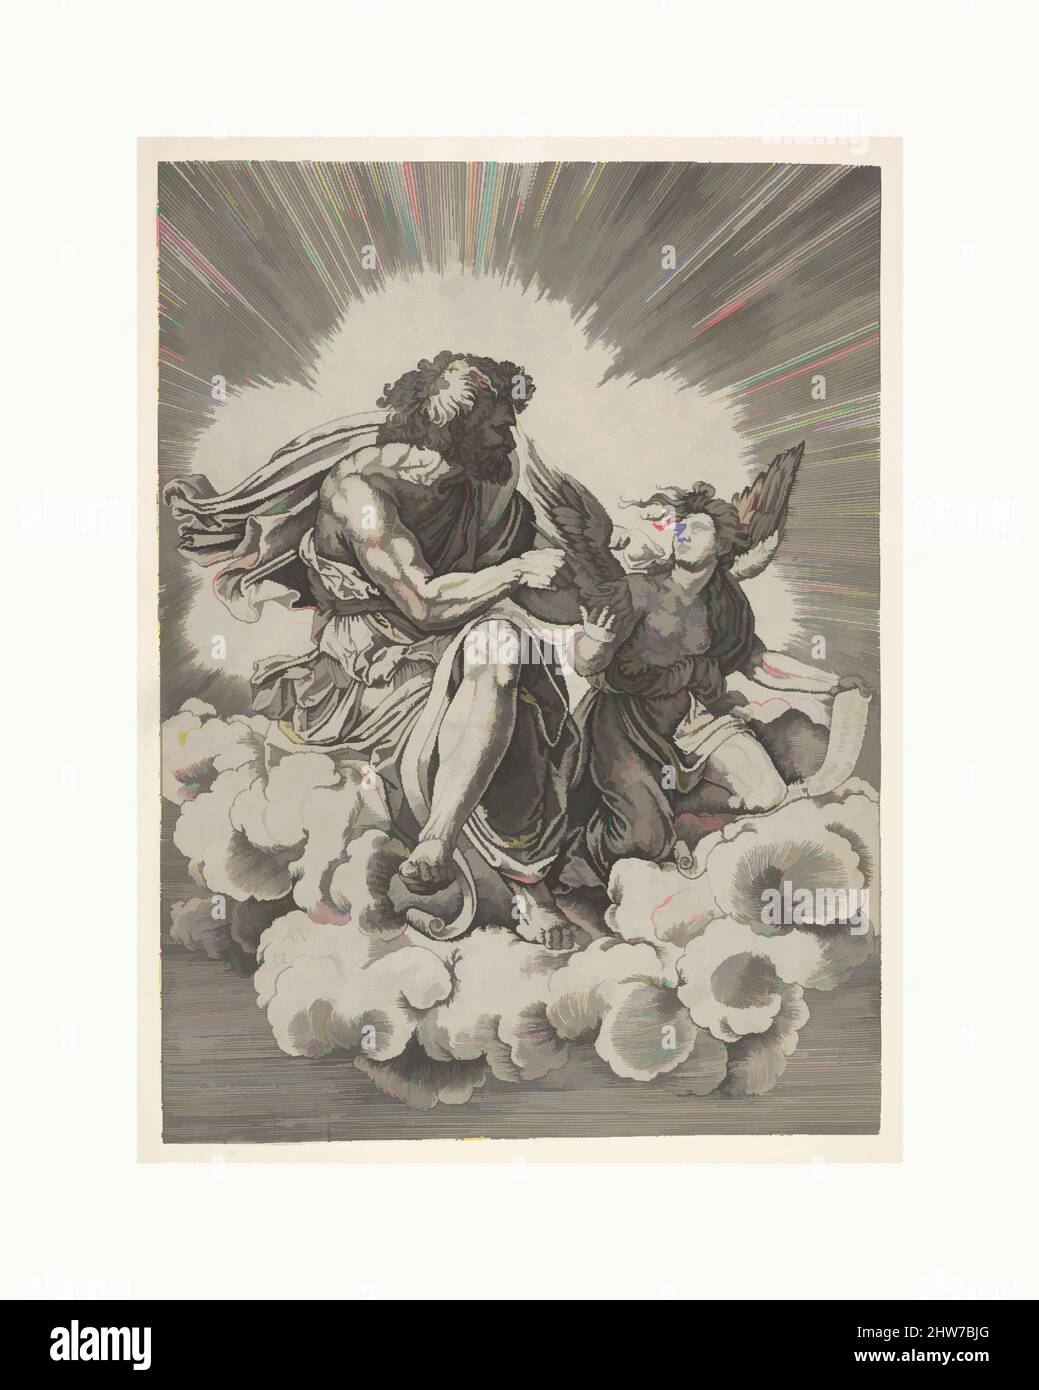 Art inspired by St. Matthew, seated on a cloud with legs crossed and dipping a quill into an inkwell held by an angel, who also holds an inscribed scroll, from a series of the four evangelists after Agostino Veneziano, which are in turn after Giulio Romano, after 1518, Engraving, sheet, Classic works modernized by Artotop with a splash of modernity. Shapes, color and value, eye-catching visual impact on art. Emotions through freedom of artworks in a contemporary way. A timeless message pursuing a wildly creative new direction. Artists turning to the digital medium and creating the Artotop NFT Stock Photo